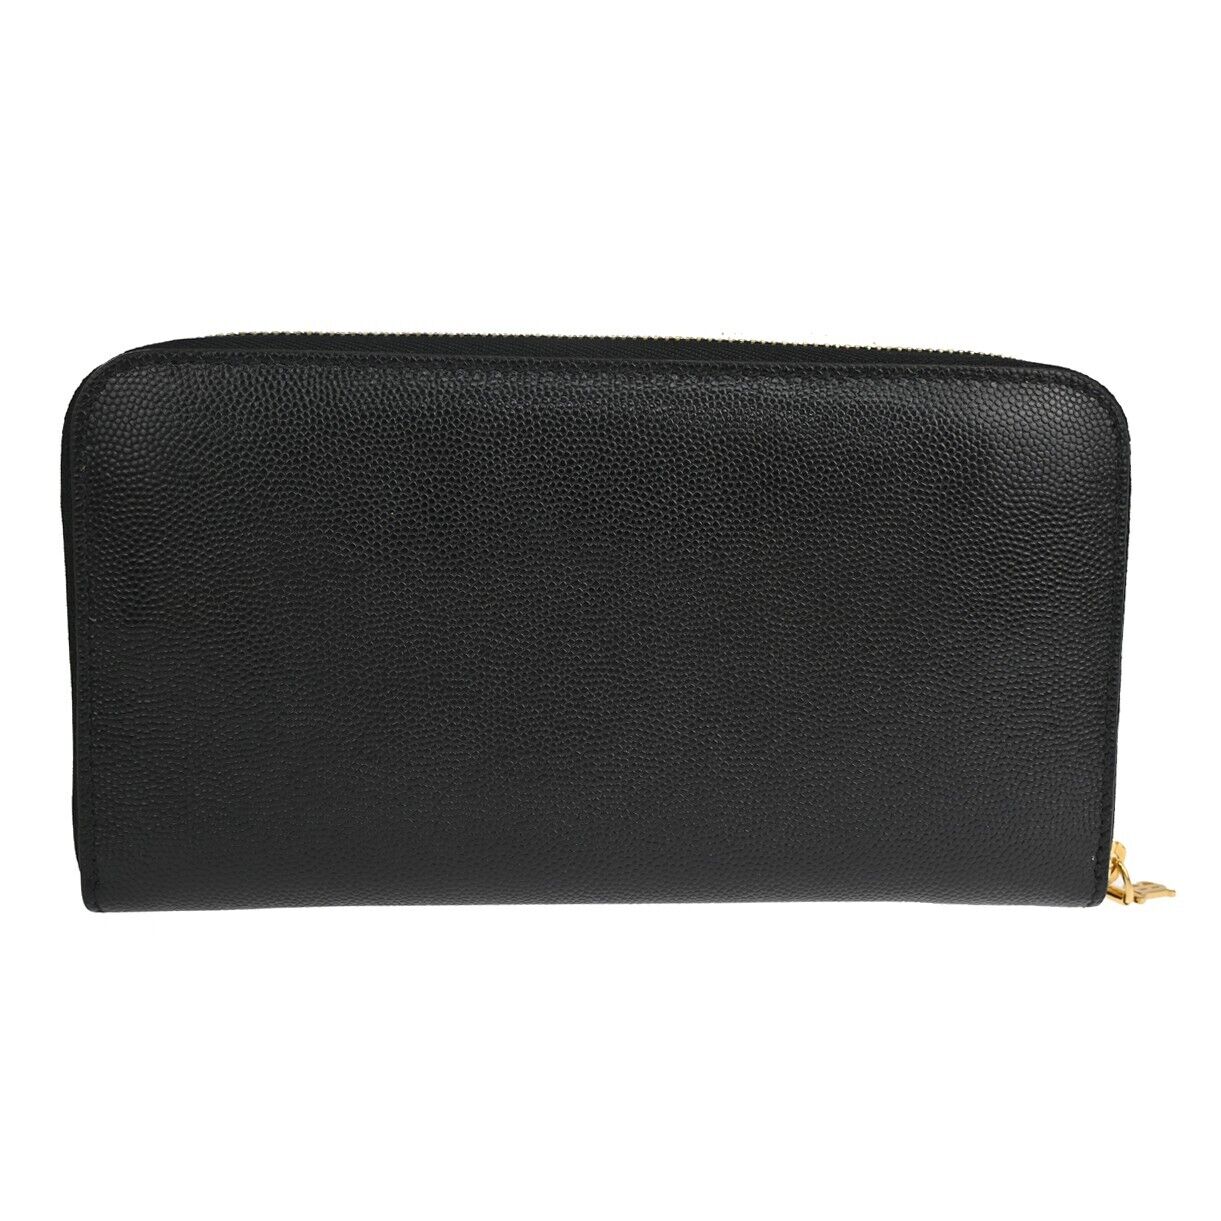 Burberry Women's Sophisticated Leather Wallet with Timeless Elegance in Black